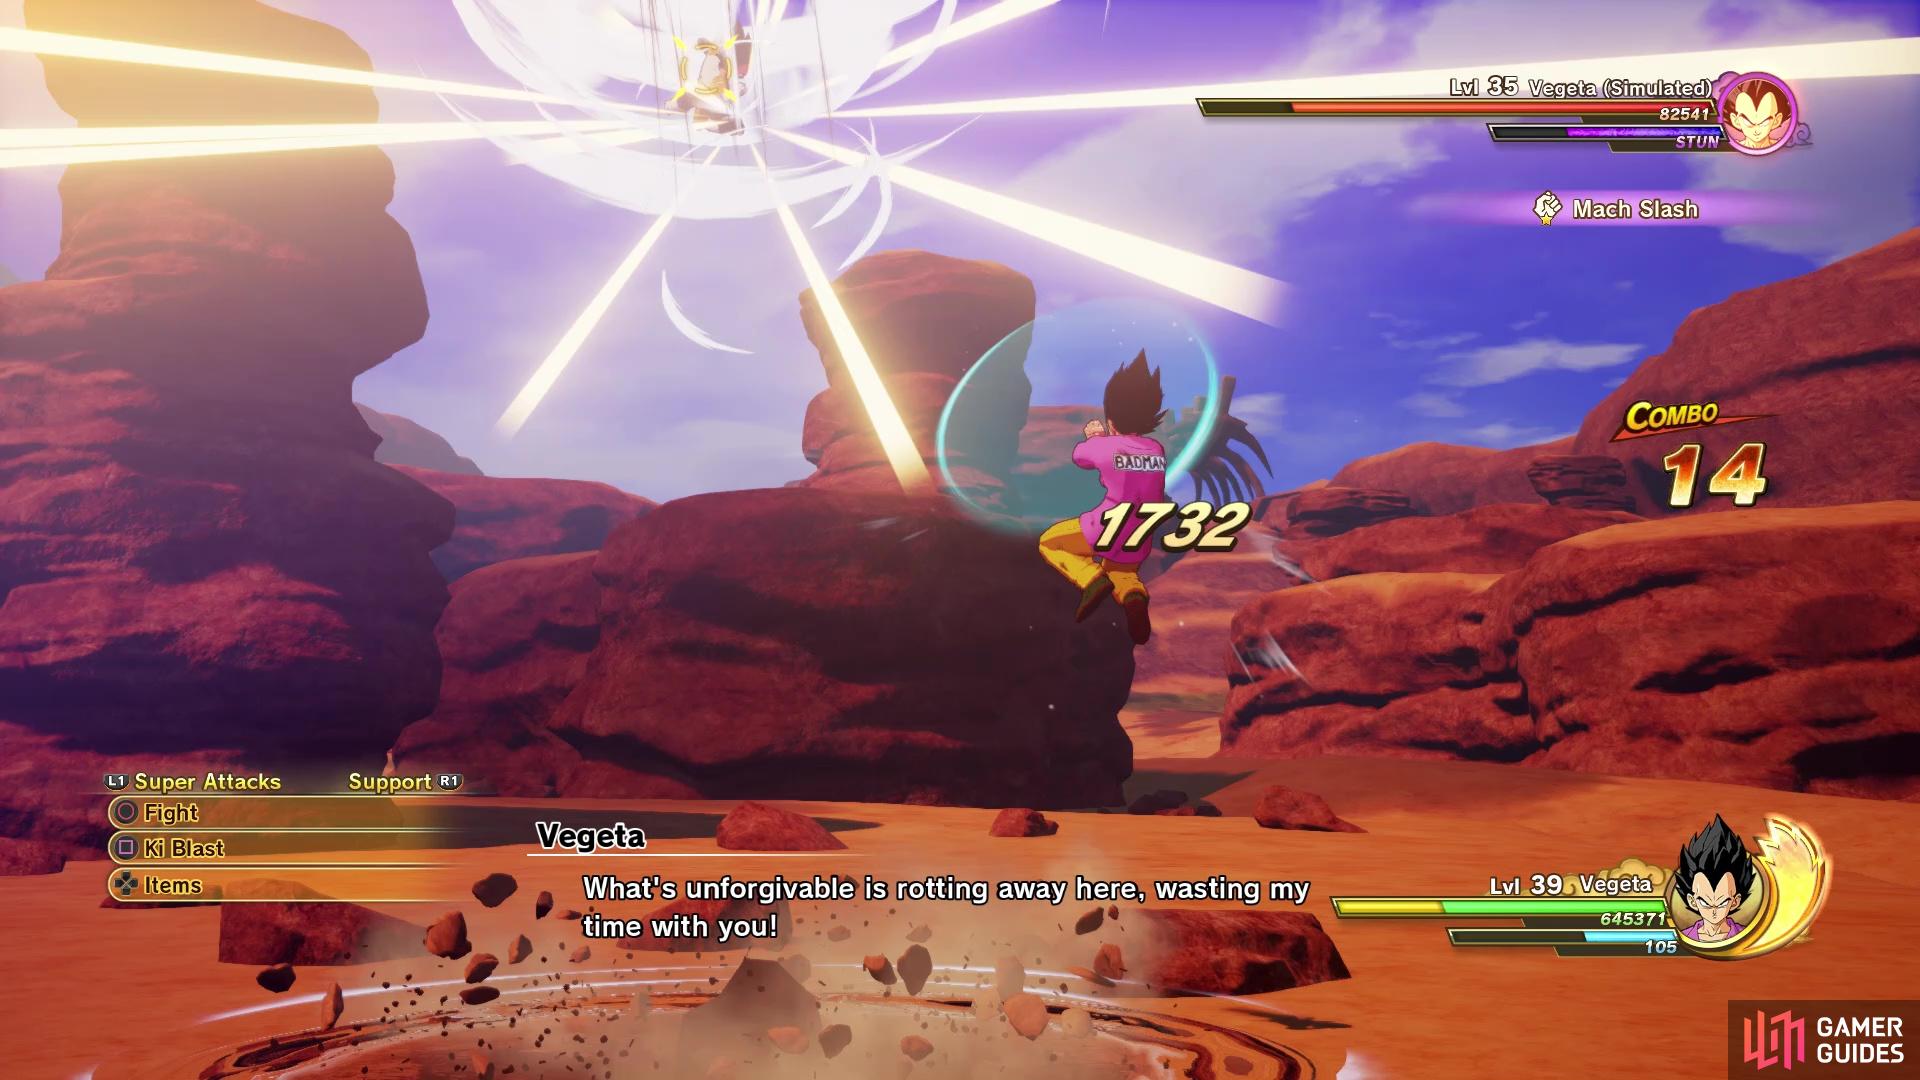 Vegeta will usually do a one-two combo of a melee attack